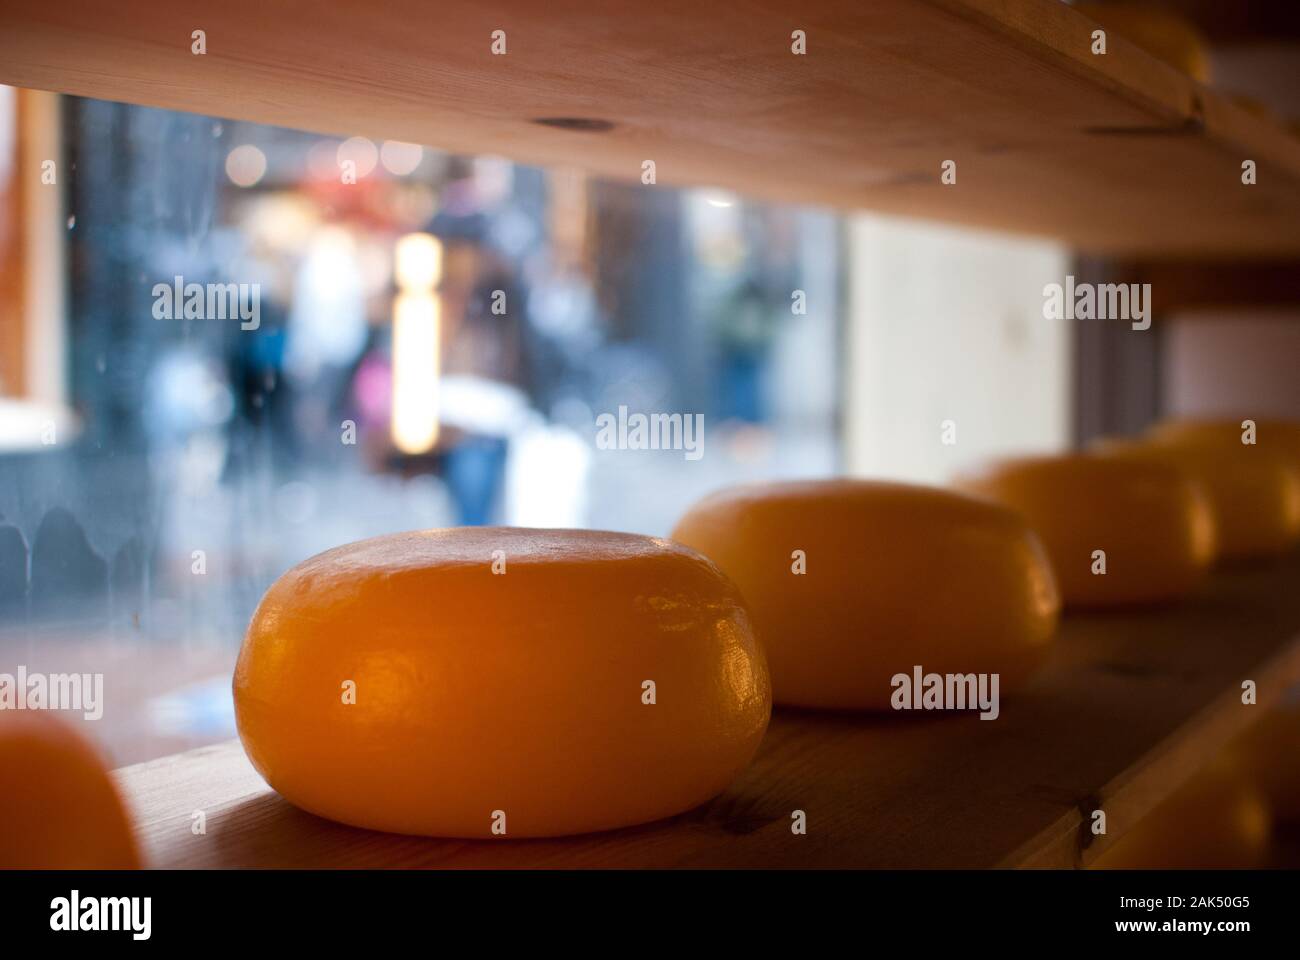 Cheeses displayed in line on the shelf of a store Stock Photo